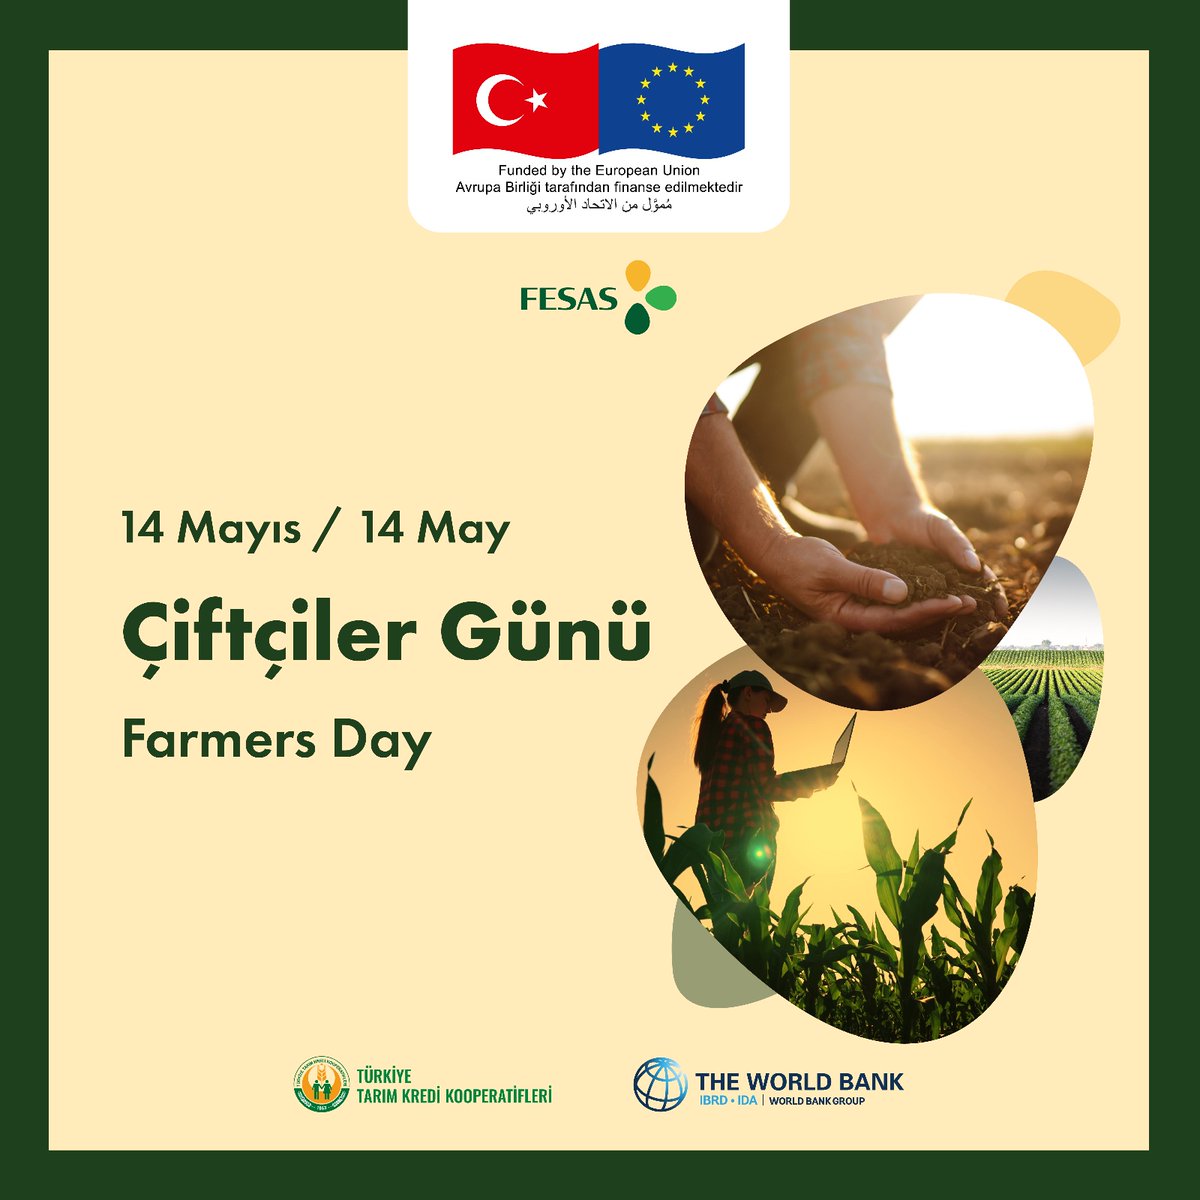 Happy 14 May Farmers' Day! As FESAS Project, we are proud to support our farmers and contribute to agricultural production through formal employment in the agricultural sector.

#FESAS #FormalEmploymentinAgriculture #FarmersDay

@EUDelegationTur
@tarimkredi
@WorldBankTurkey